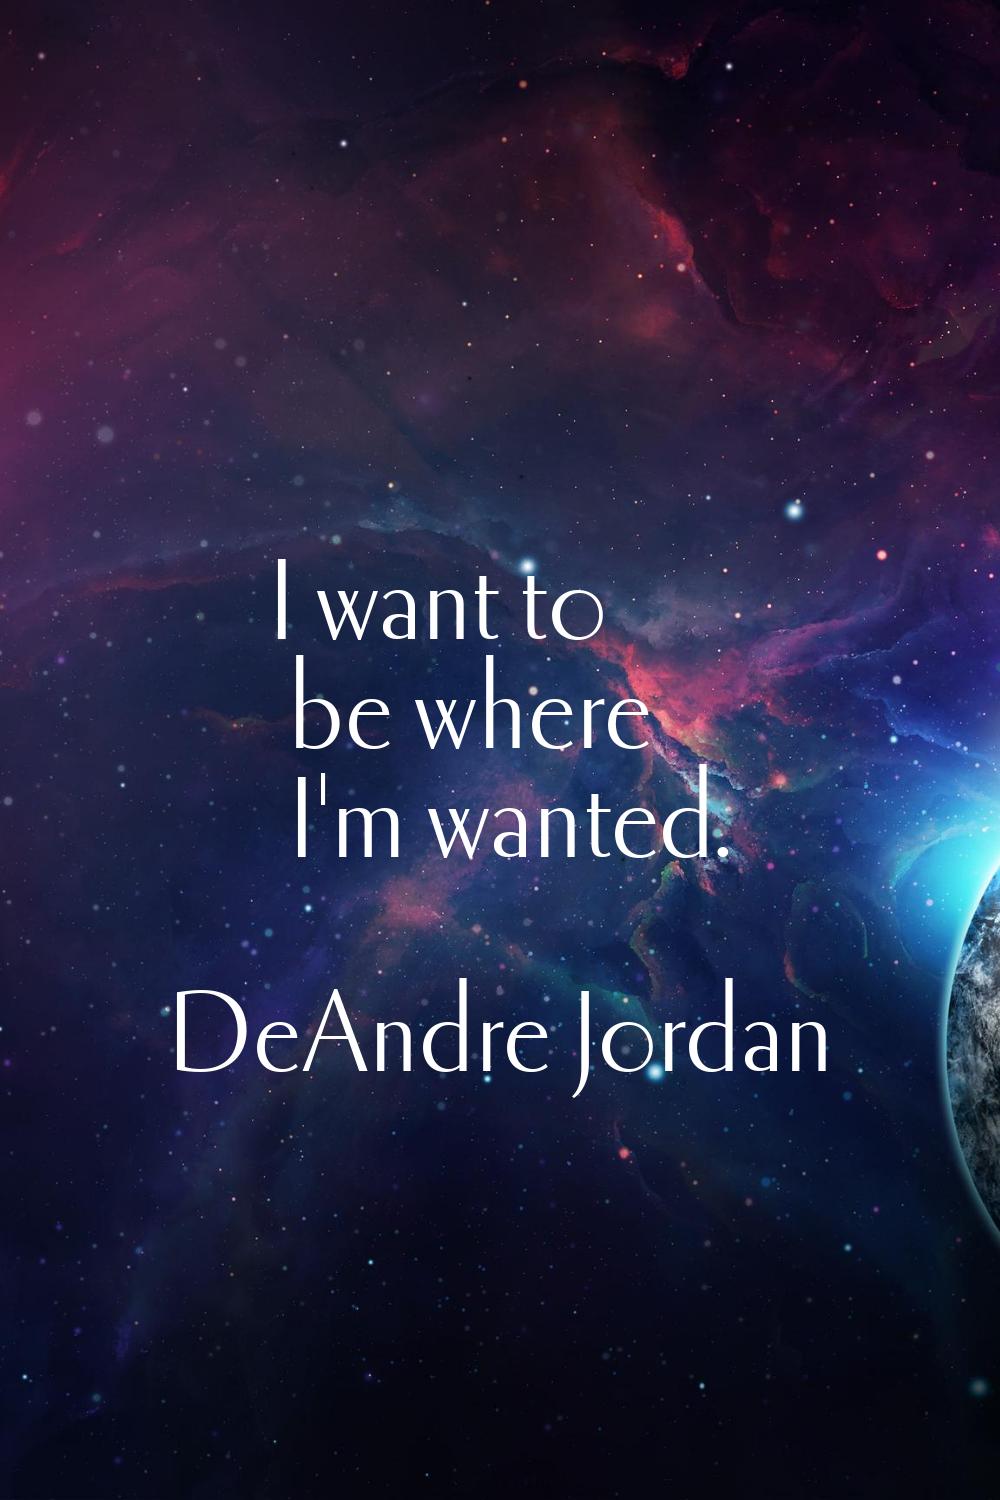 I want to be where I'm wanted.